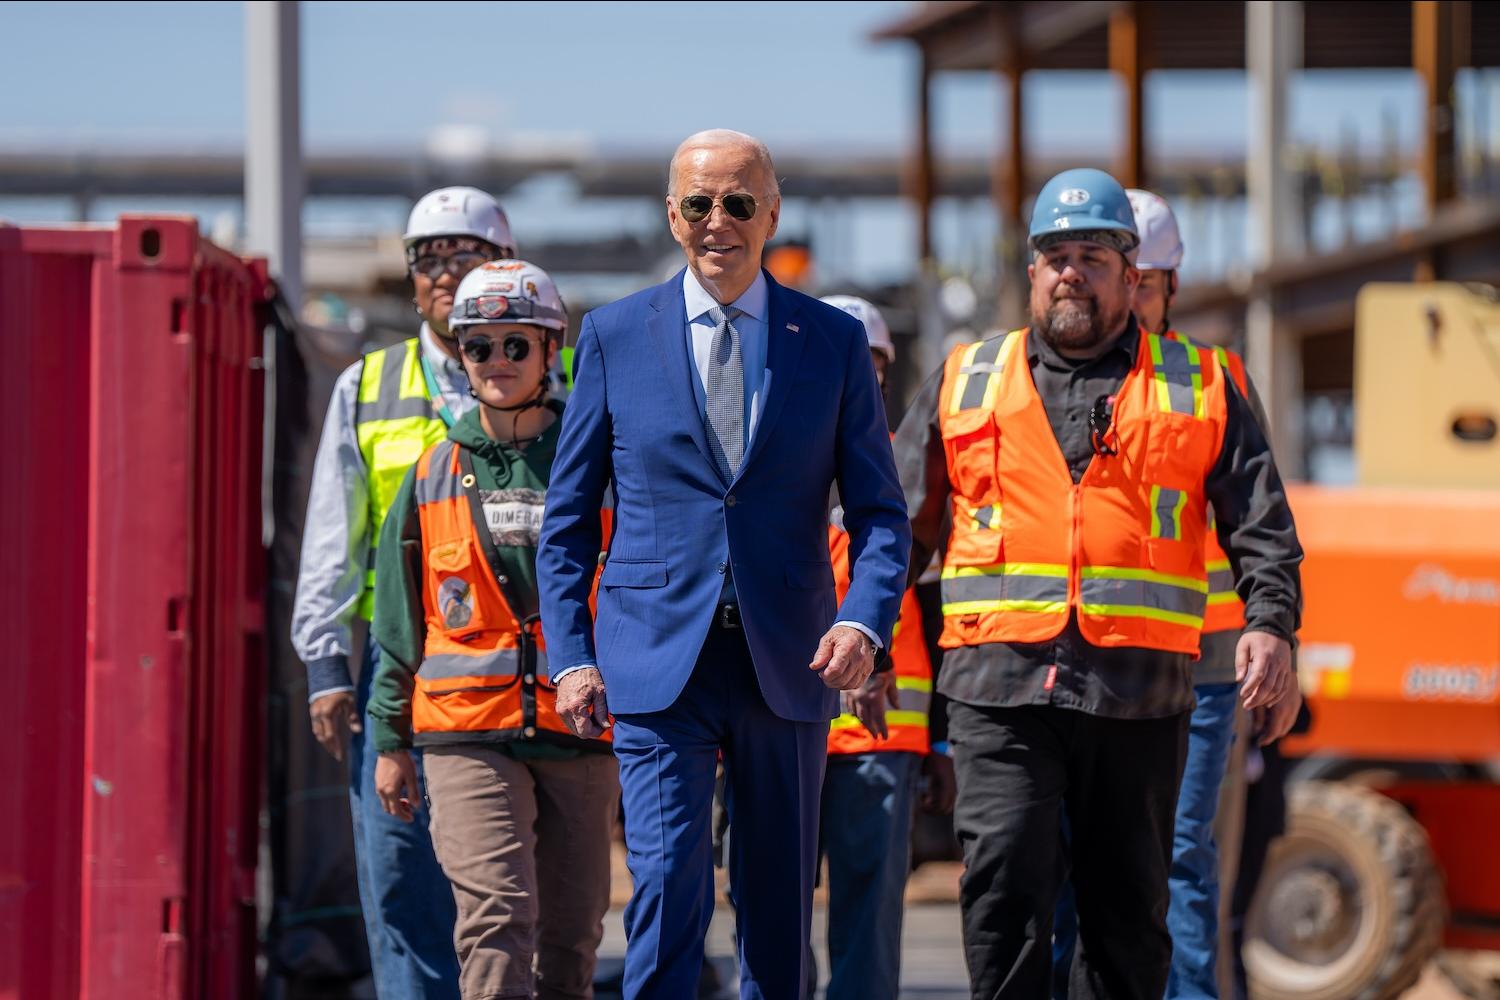 President Joe Biden visits Arizona to announce green bank funding under CHIPs and Science Act